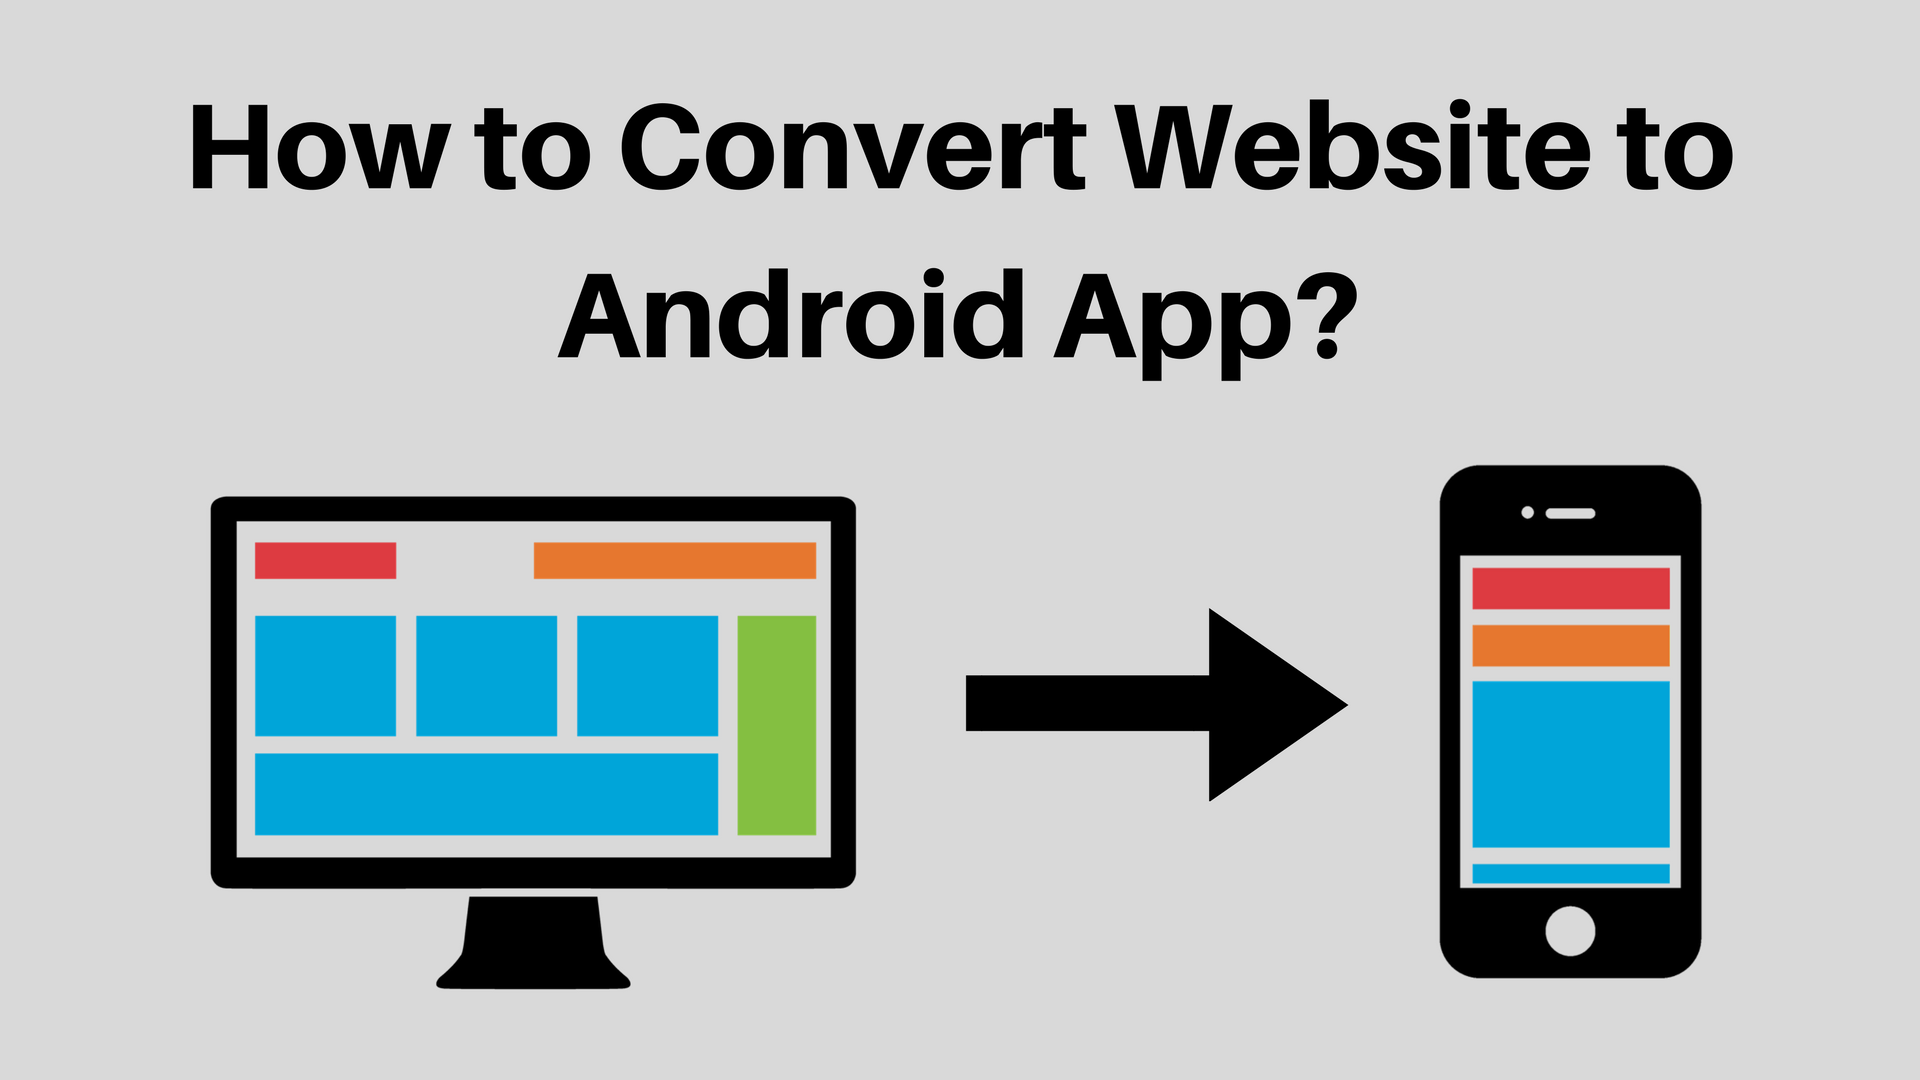 How to Convert Website to Android App Using Android Studio